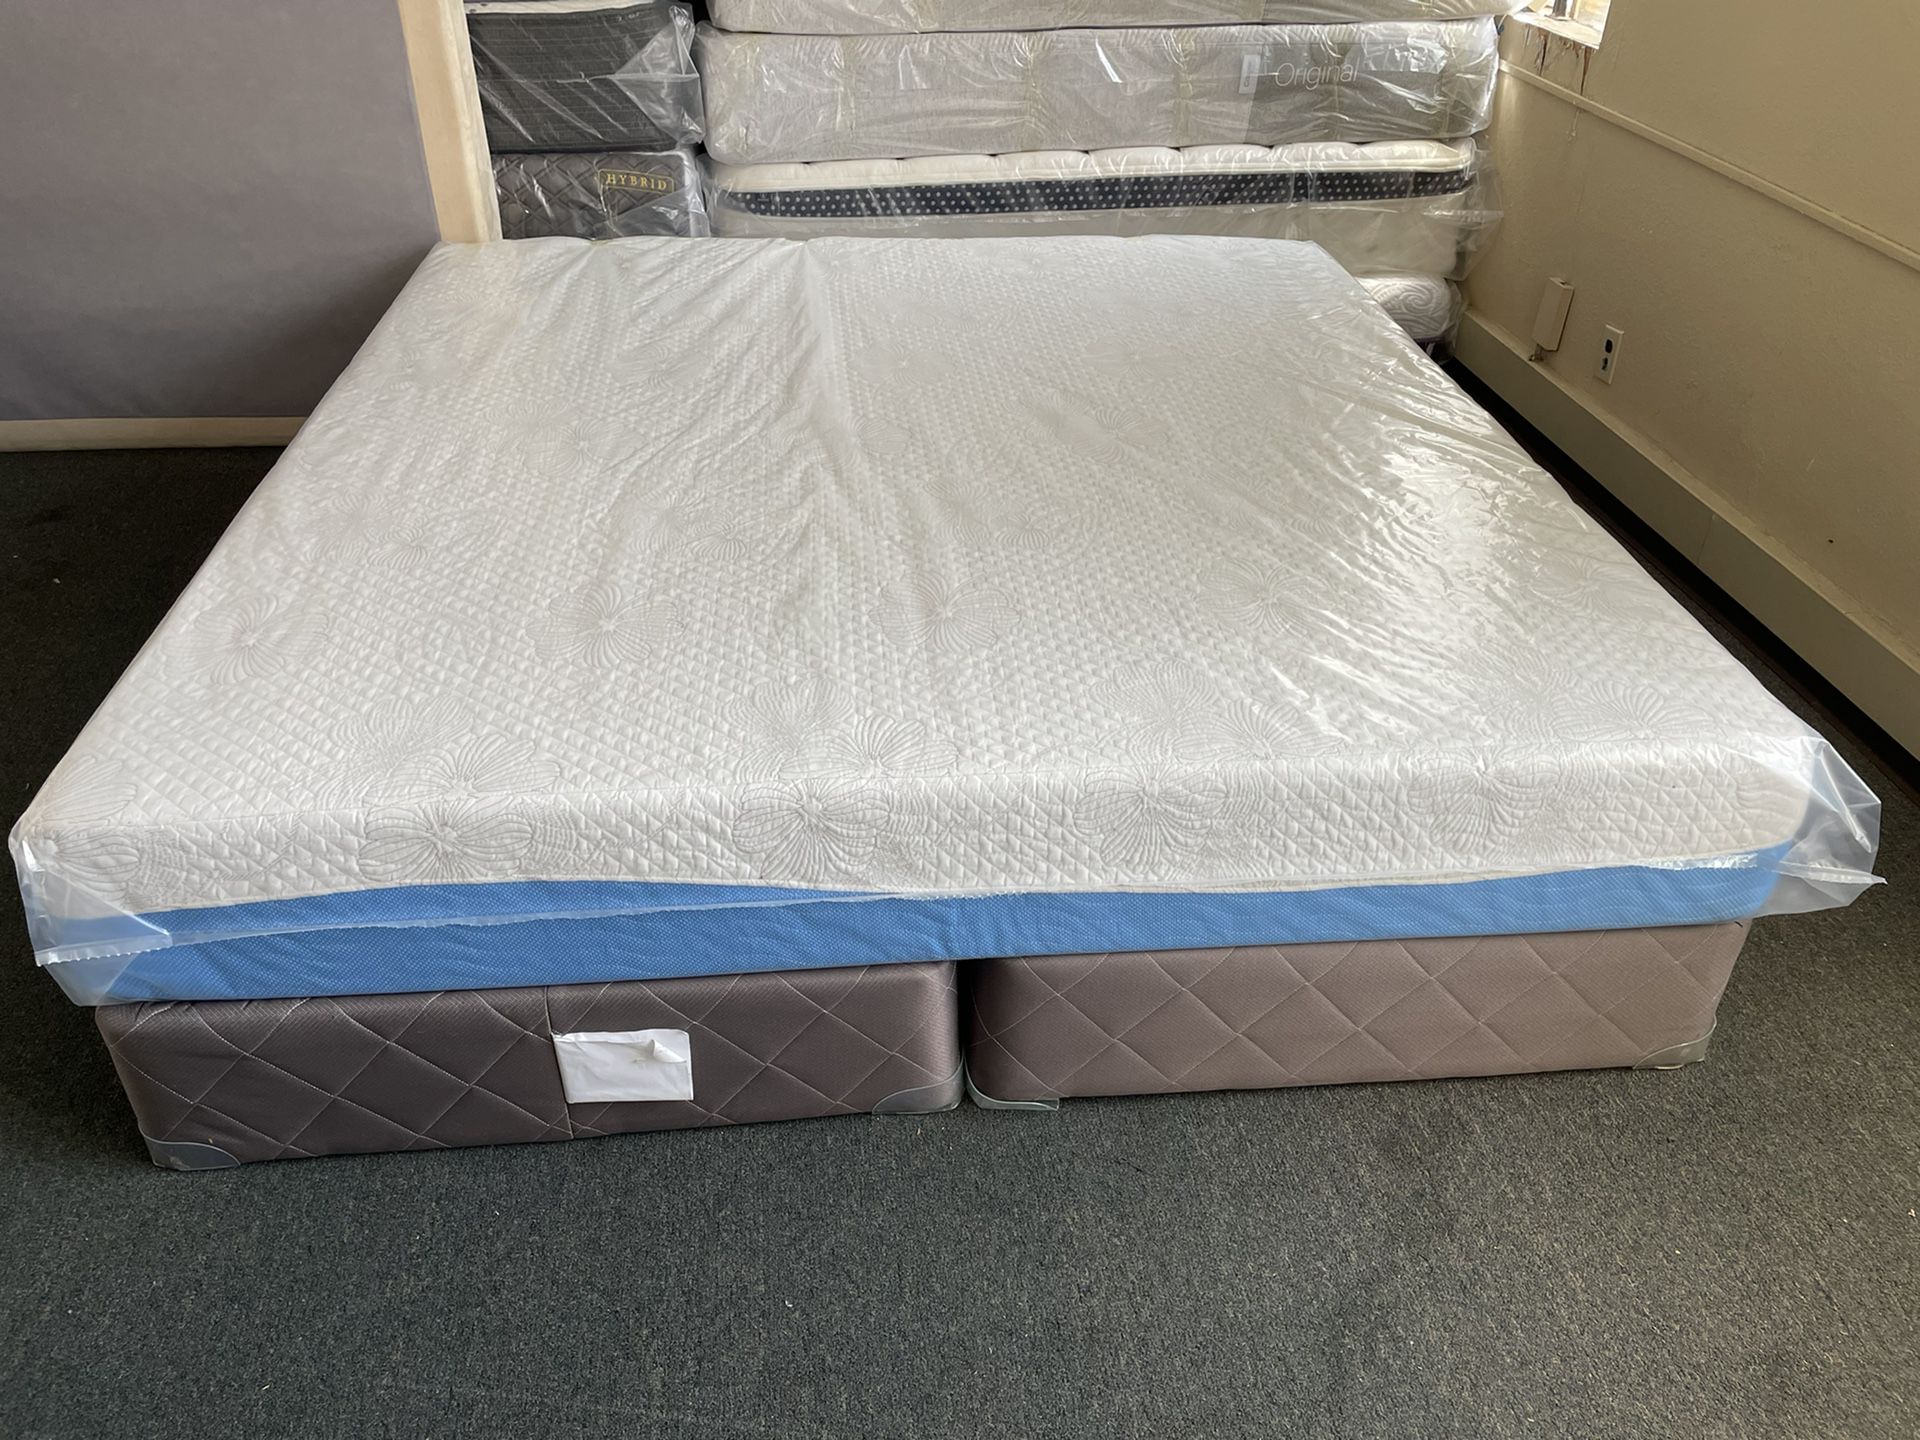 Memory foam king size mattress spring free Delivery for Sale in FL - OfferUp